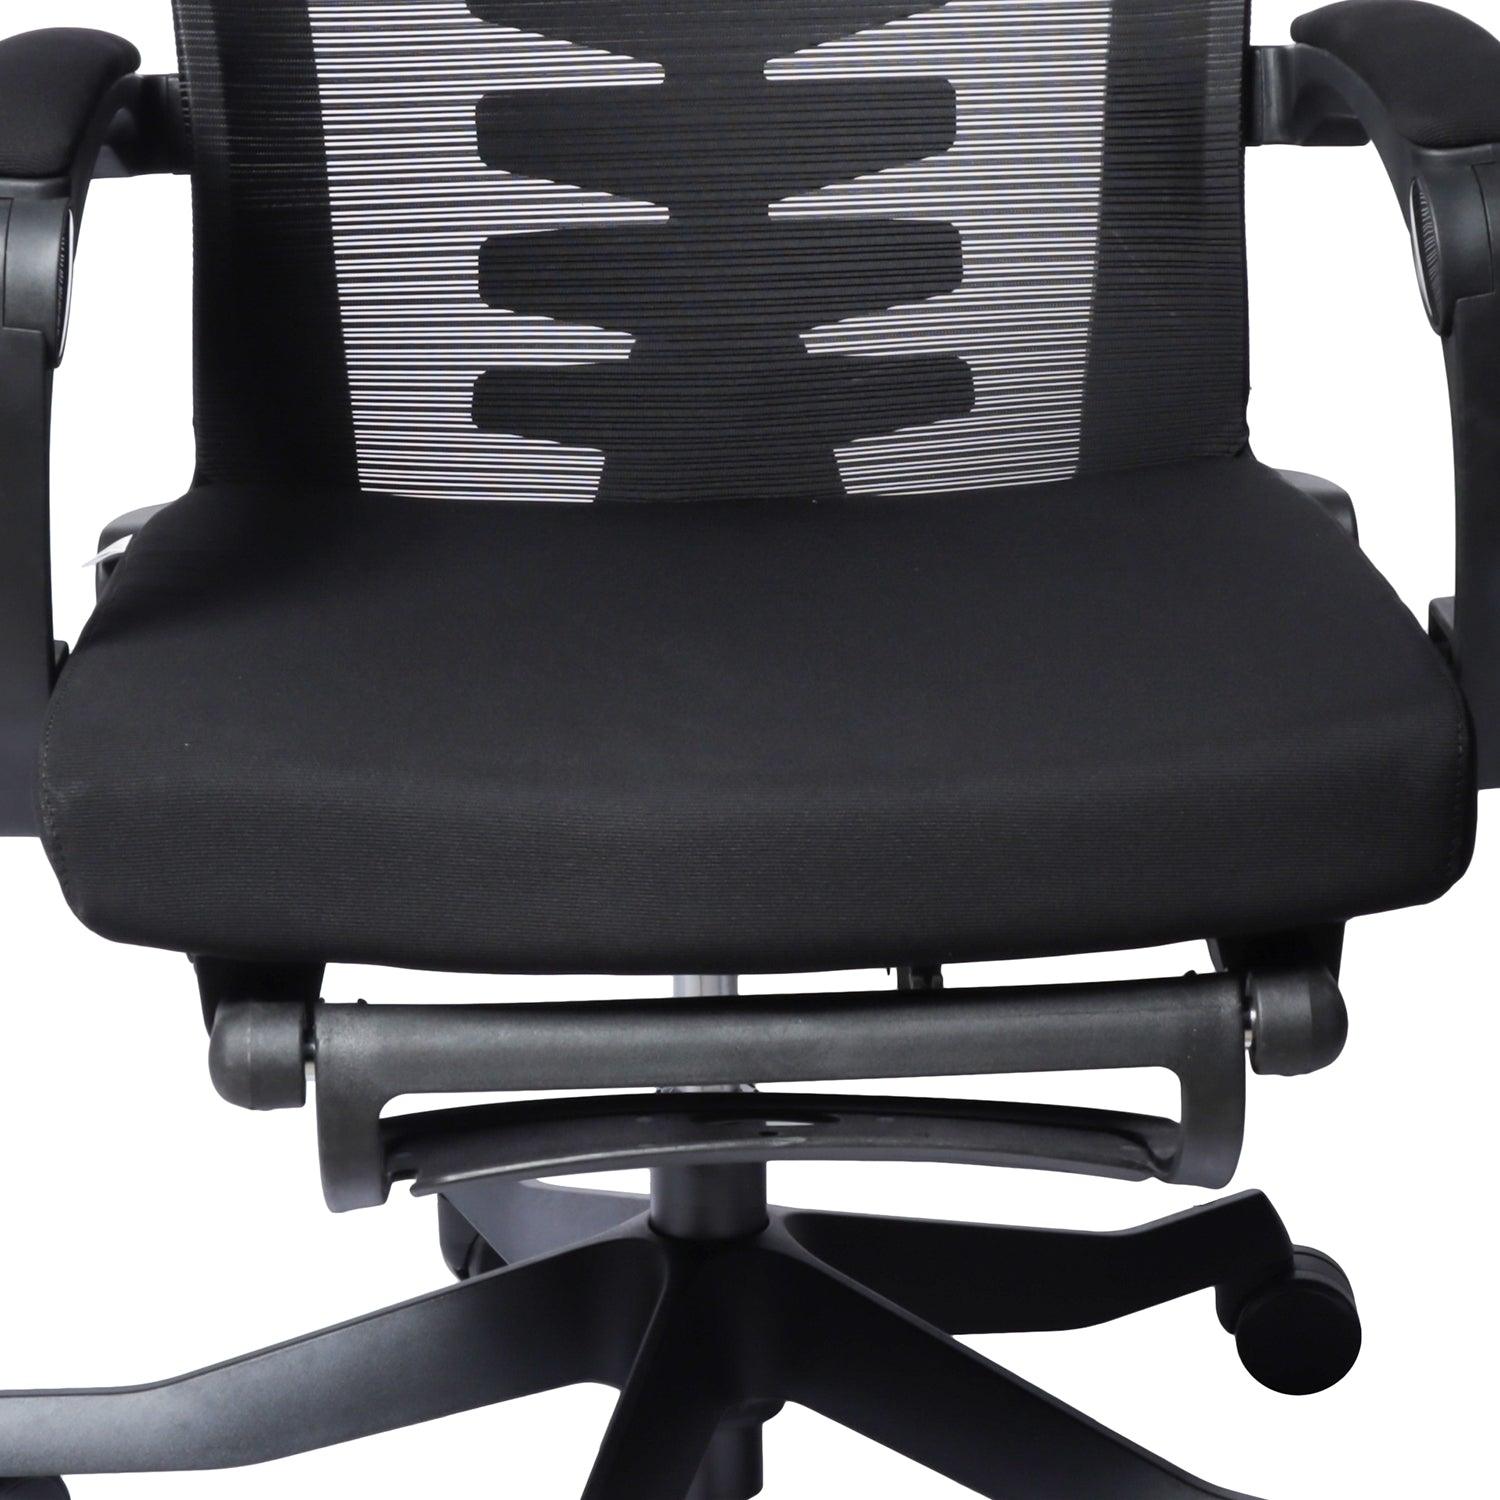 DrLuxur POSE ™ Office/Gaming Chair- Perfect for Posture, Work and Gaming - DrLuxur